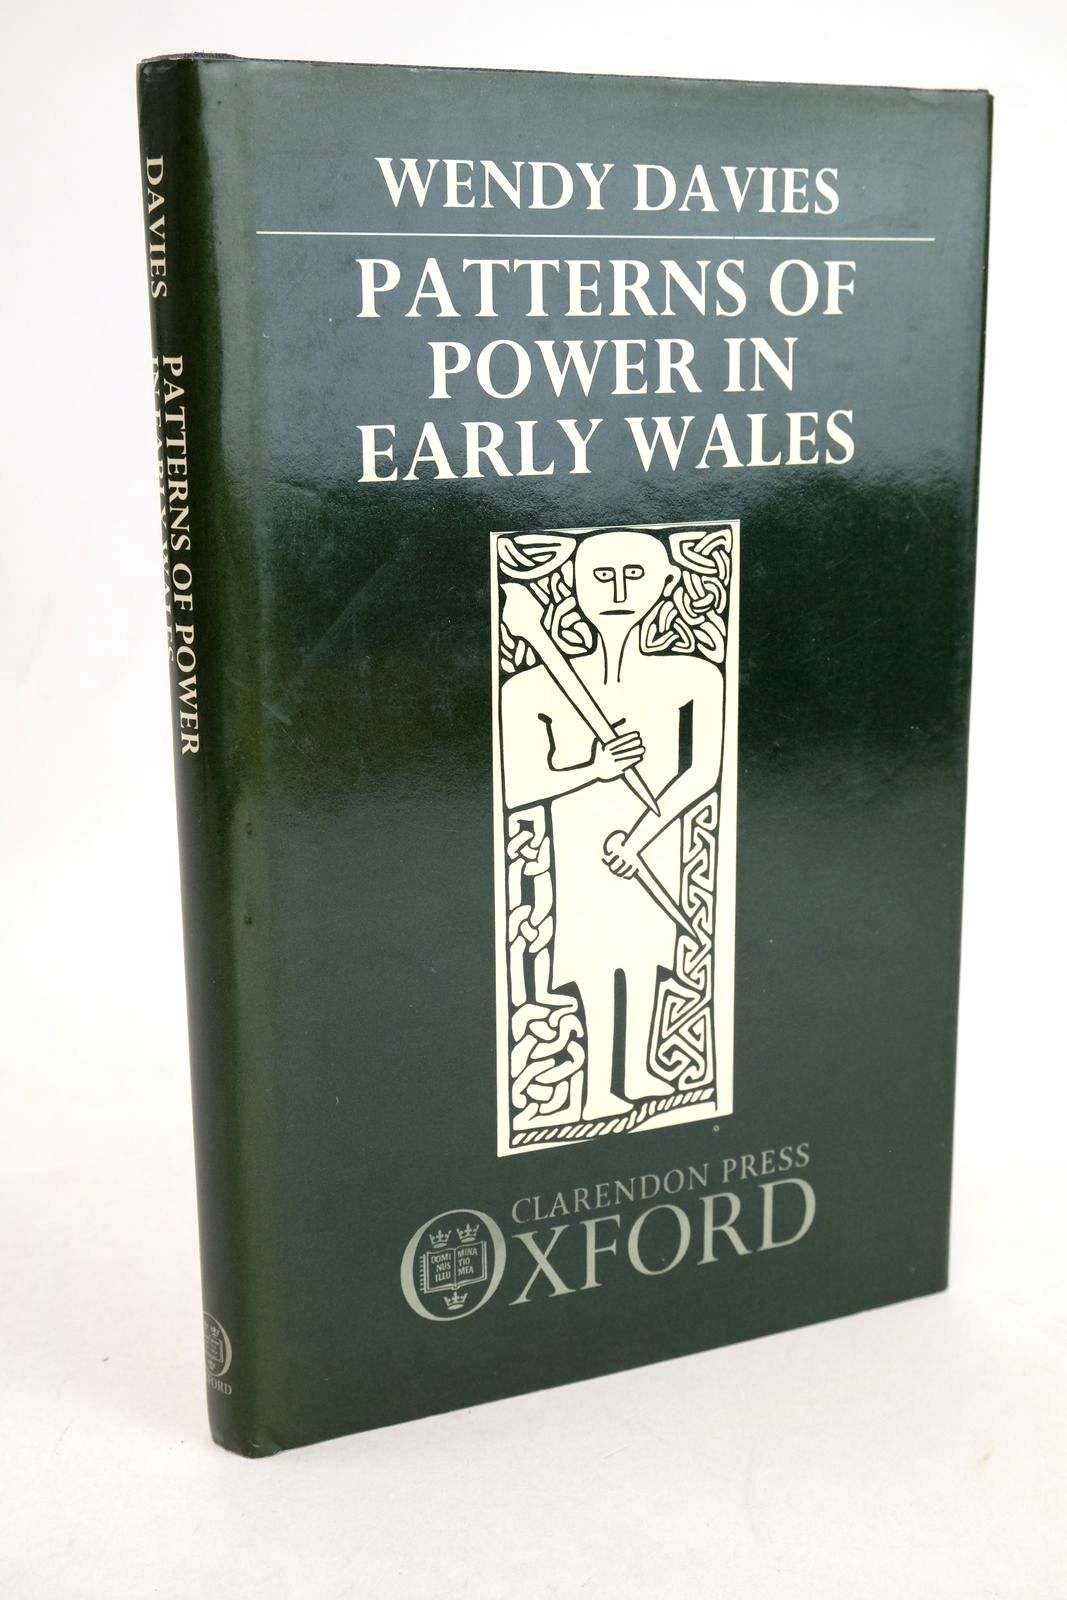 Photo of PATTERNS OF POWER IN EARLY WALES written by Davies, Wendy published by Oxford University Press, Clarendon Press (STOCK CODE: 1327365)  for sale by Stella & Rose's Books